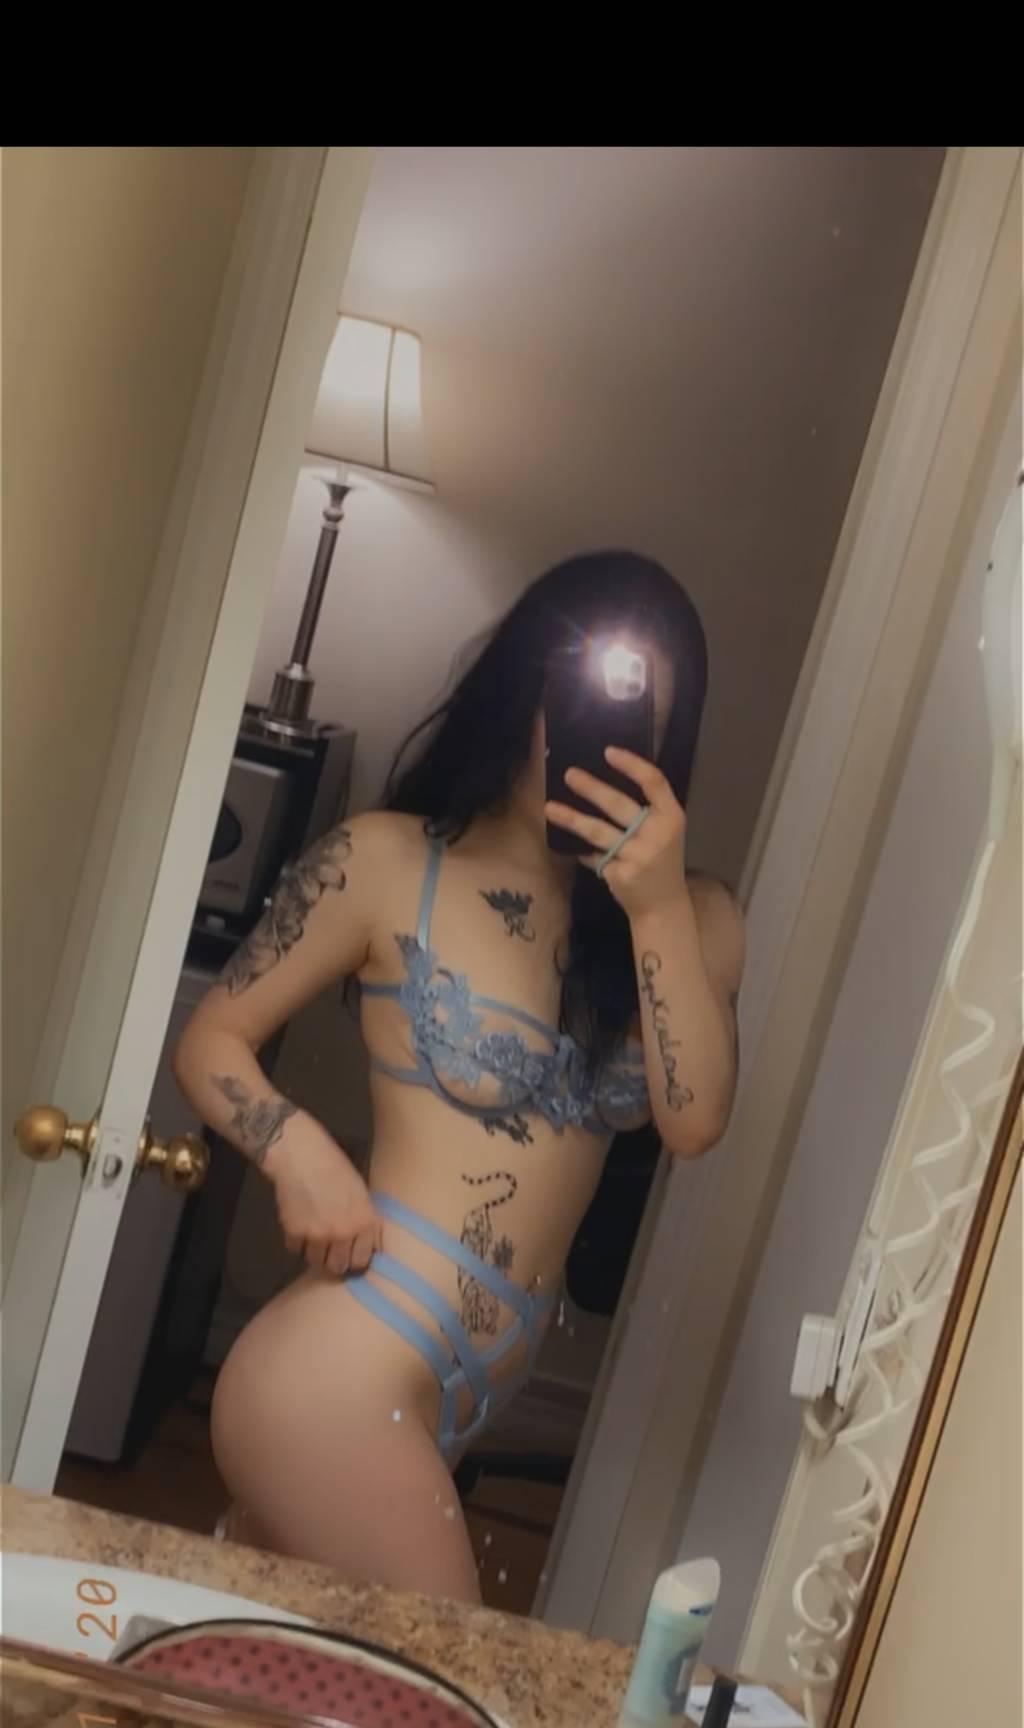 young tight pu$$y new in town and duos available !!!